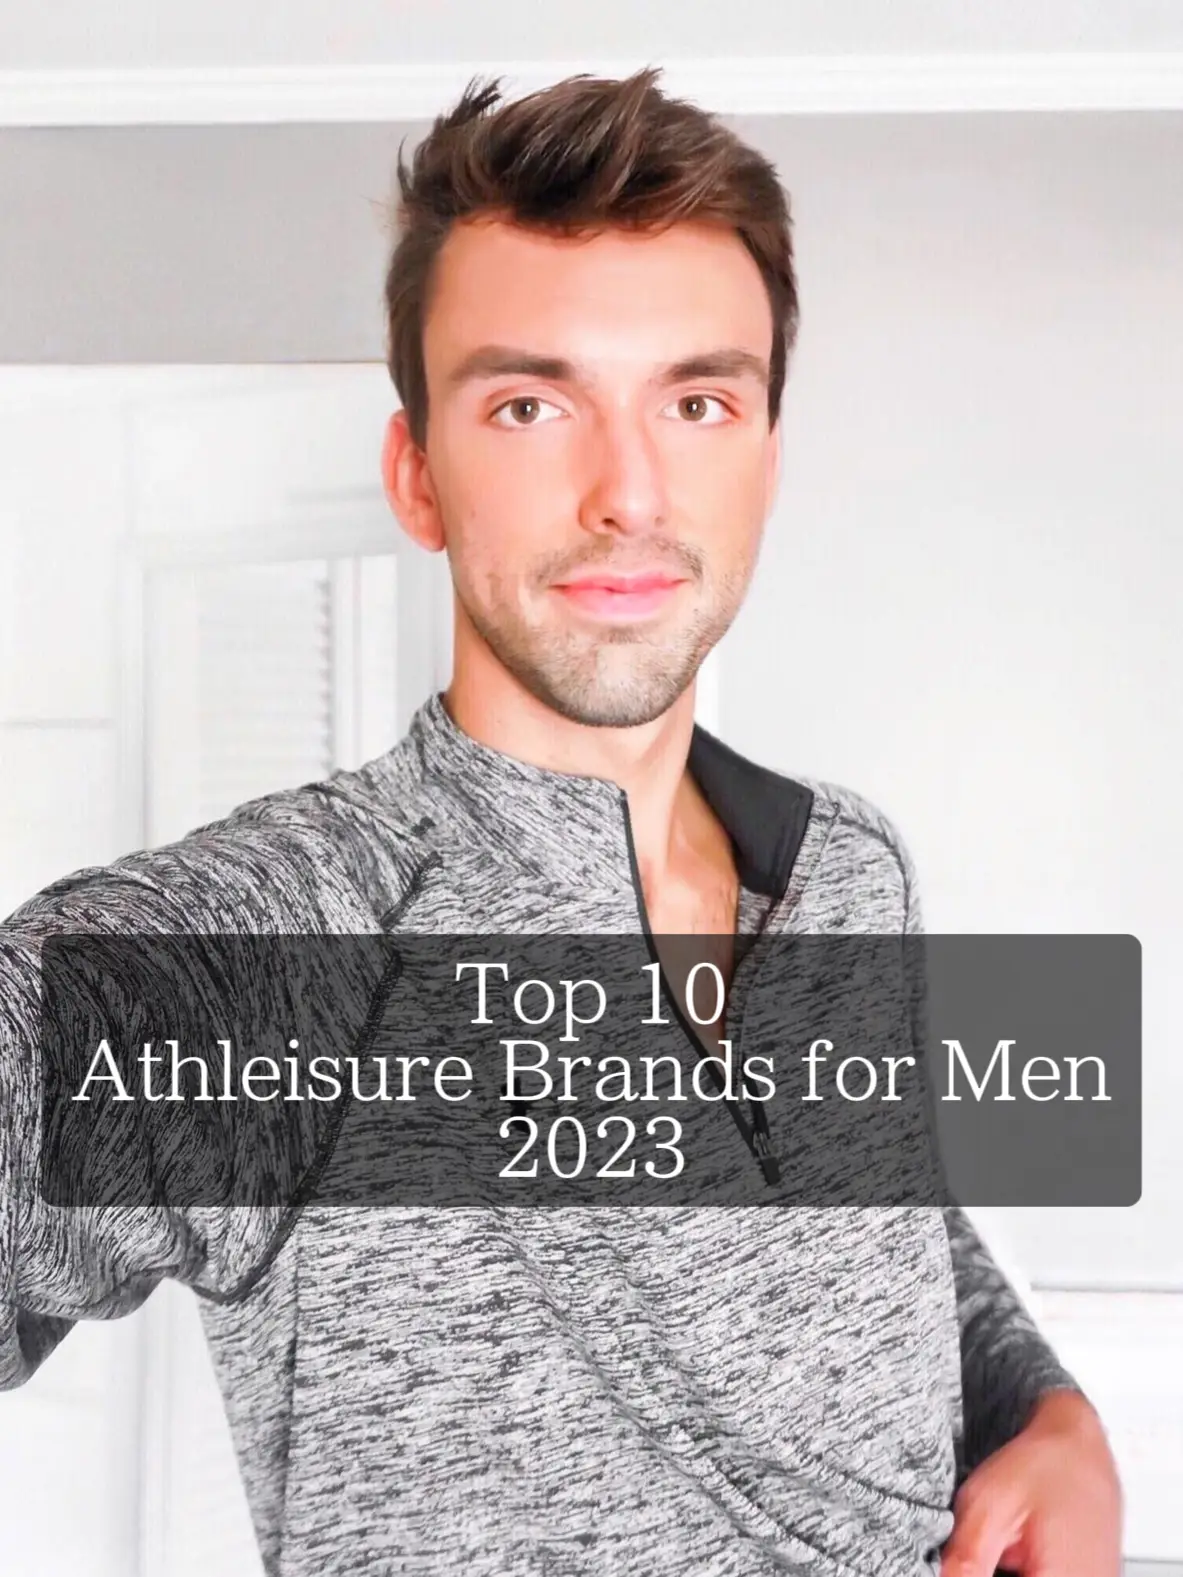 From Gym to Street: Top 10 Men's Athleisure Brands